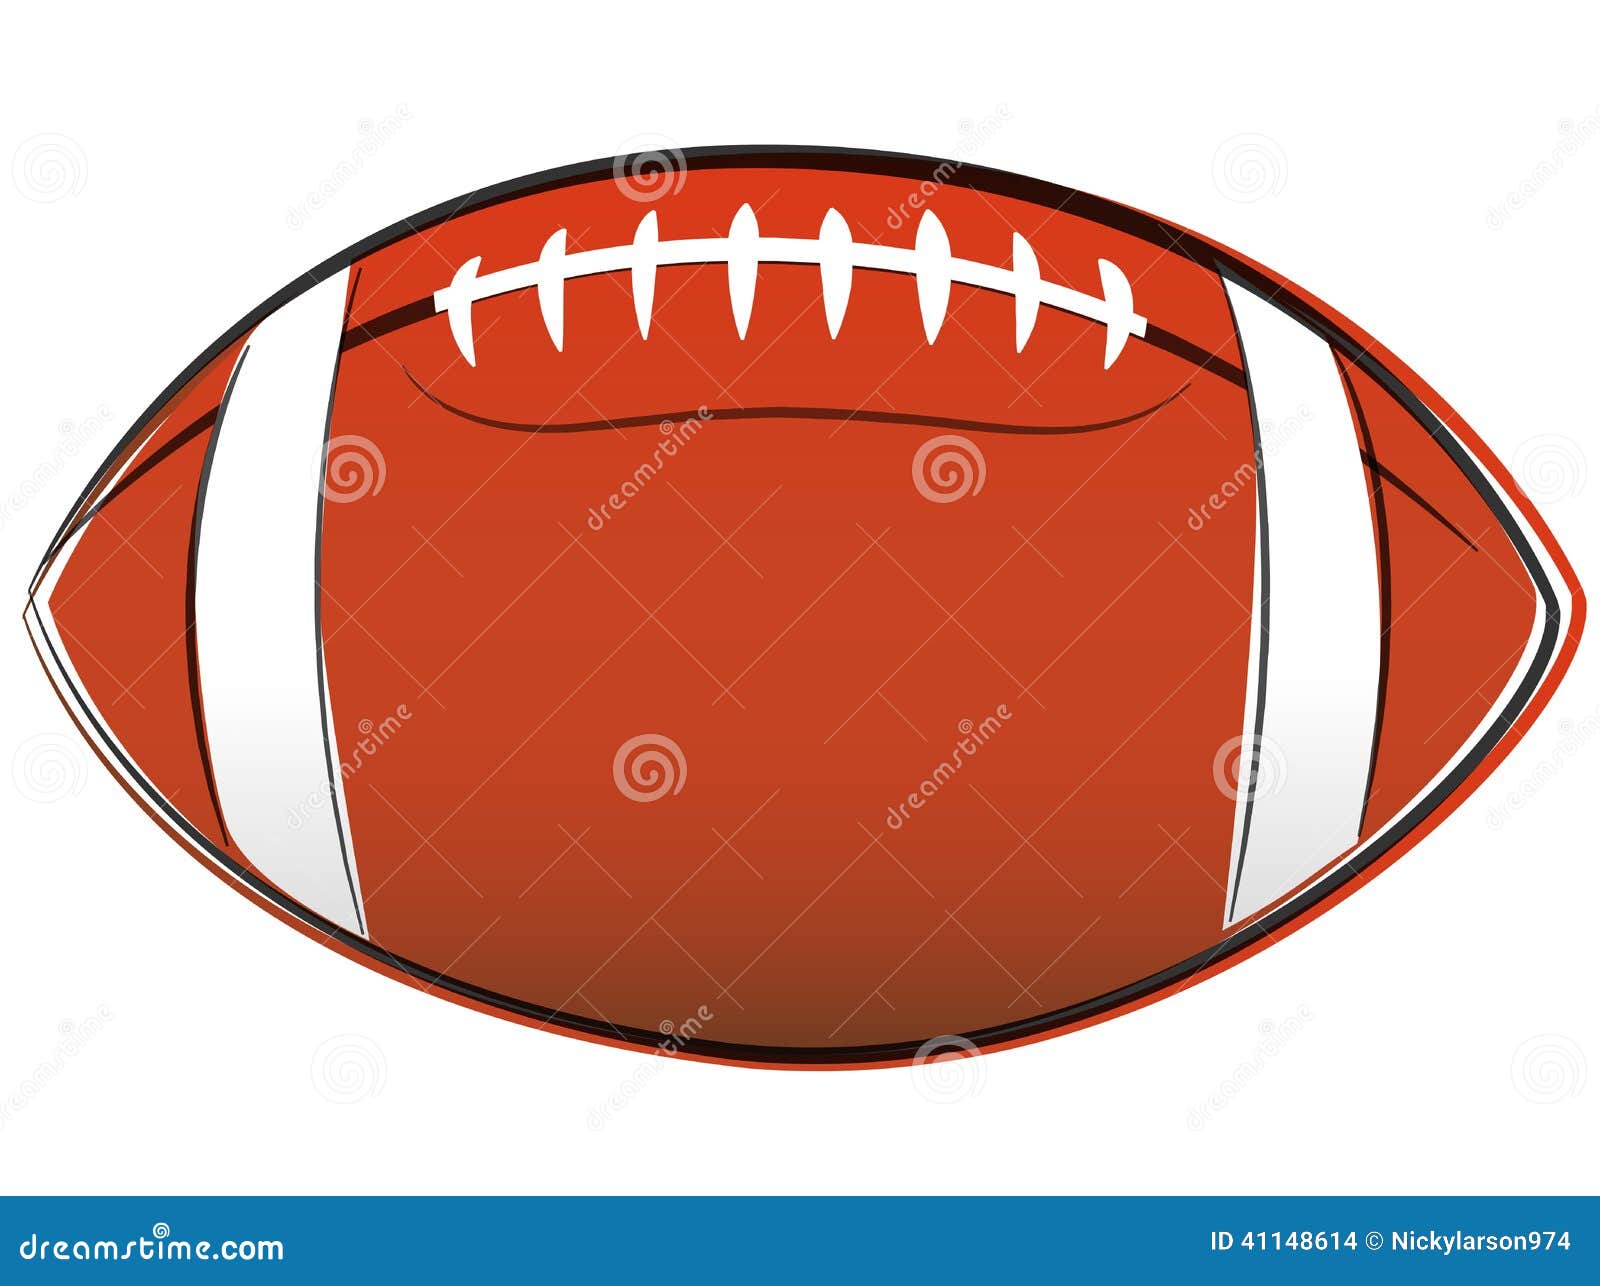 American Football Drawing Vector Illustration Ball White Background 41148614 